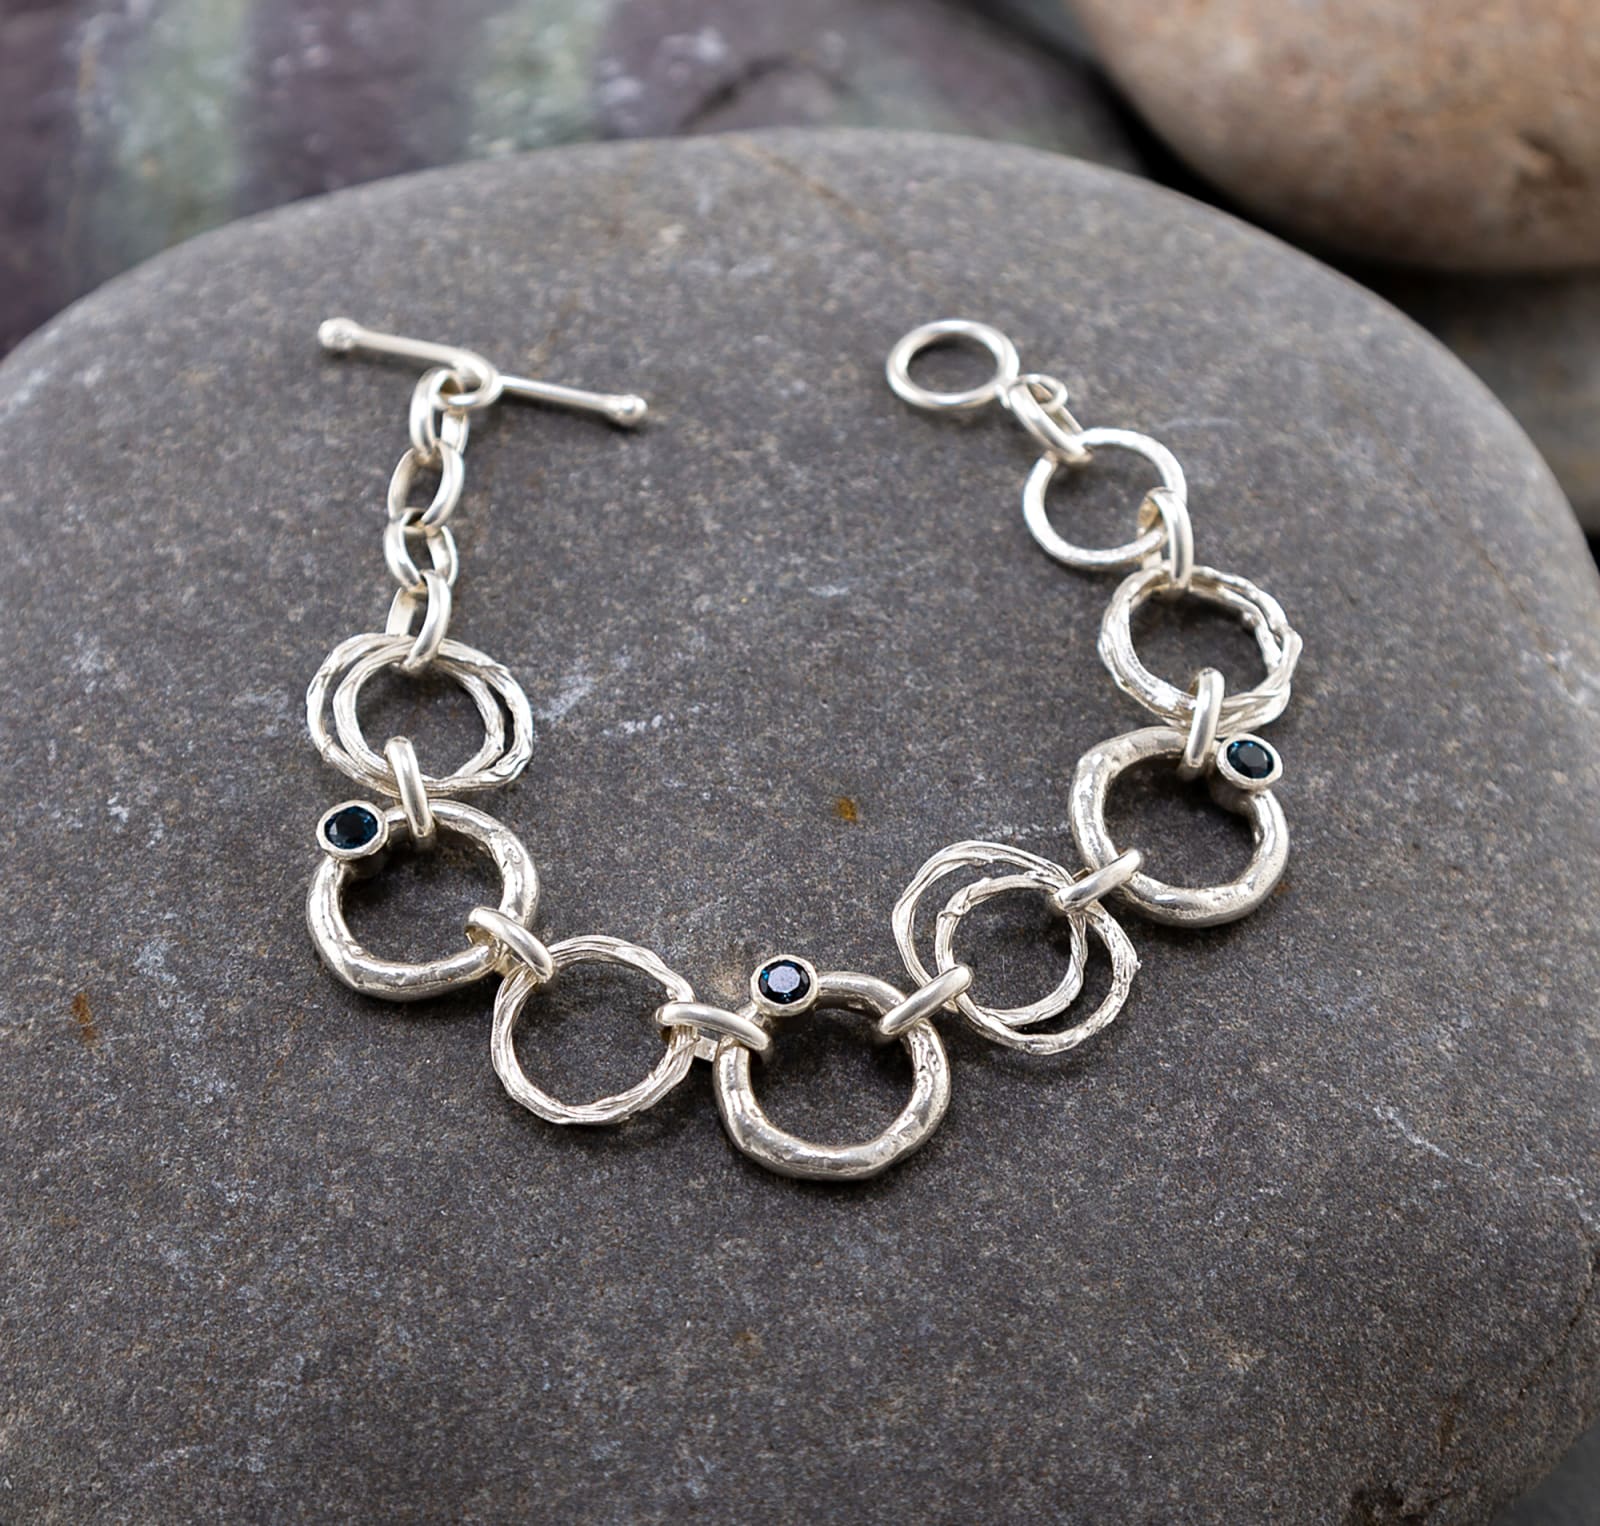 whitewatergallery-marsha-drew-rockpool-chain-link-bracelet-with-hammered-and-molten-silver-links-and-three-london-blue-topaz-stones